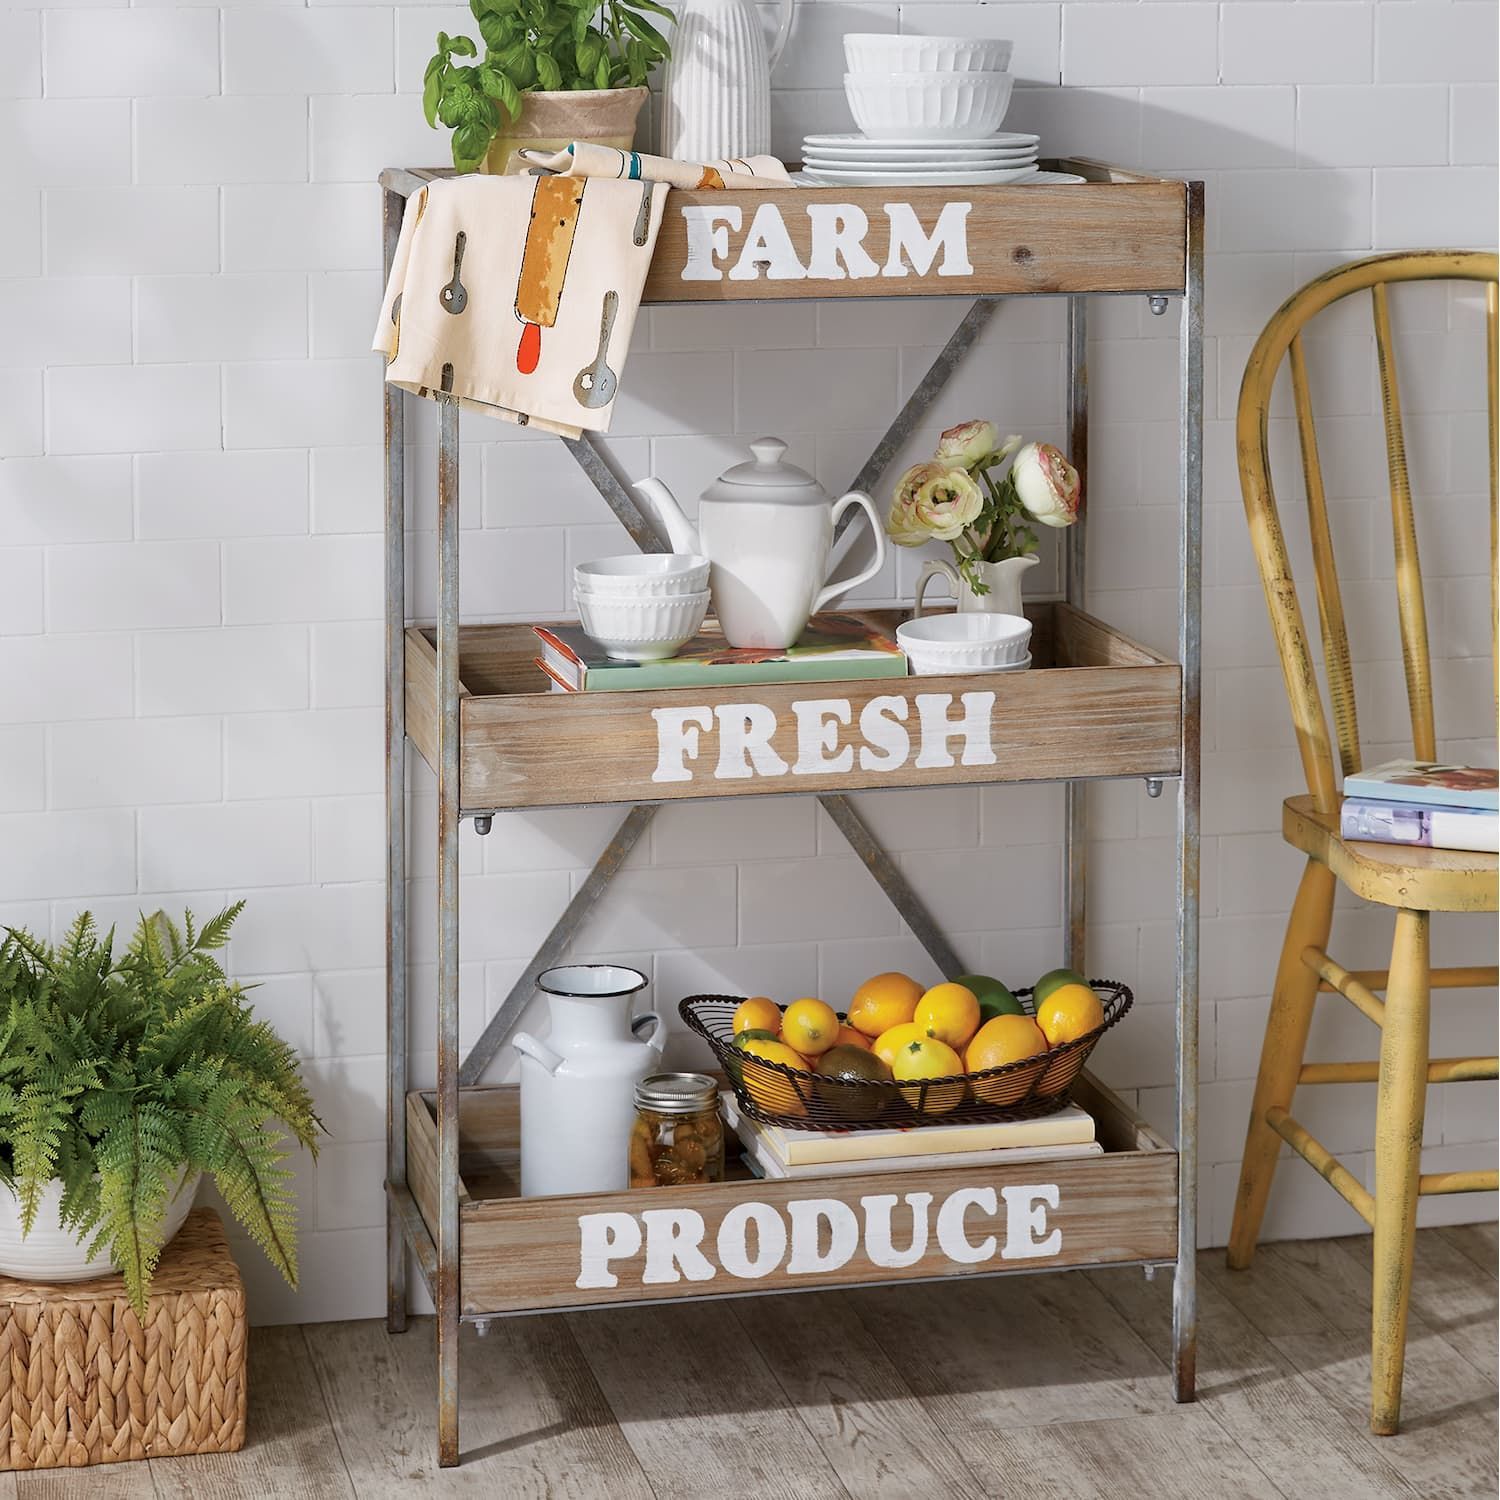 Farm Fresh Produce Shelf | Country Door | Farm Fresh Produce, Kitchen For Farmhouse Stands With Shelves (View 10 of 20)